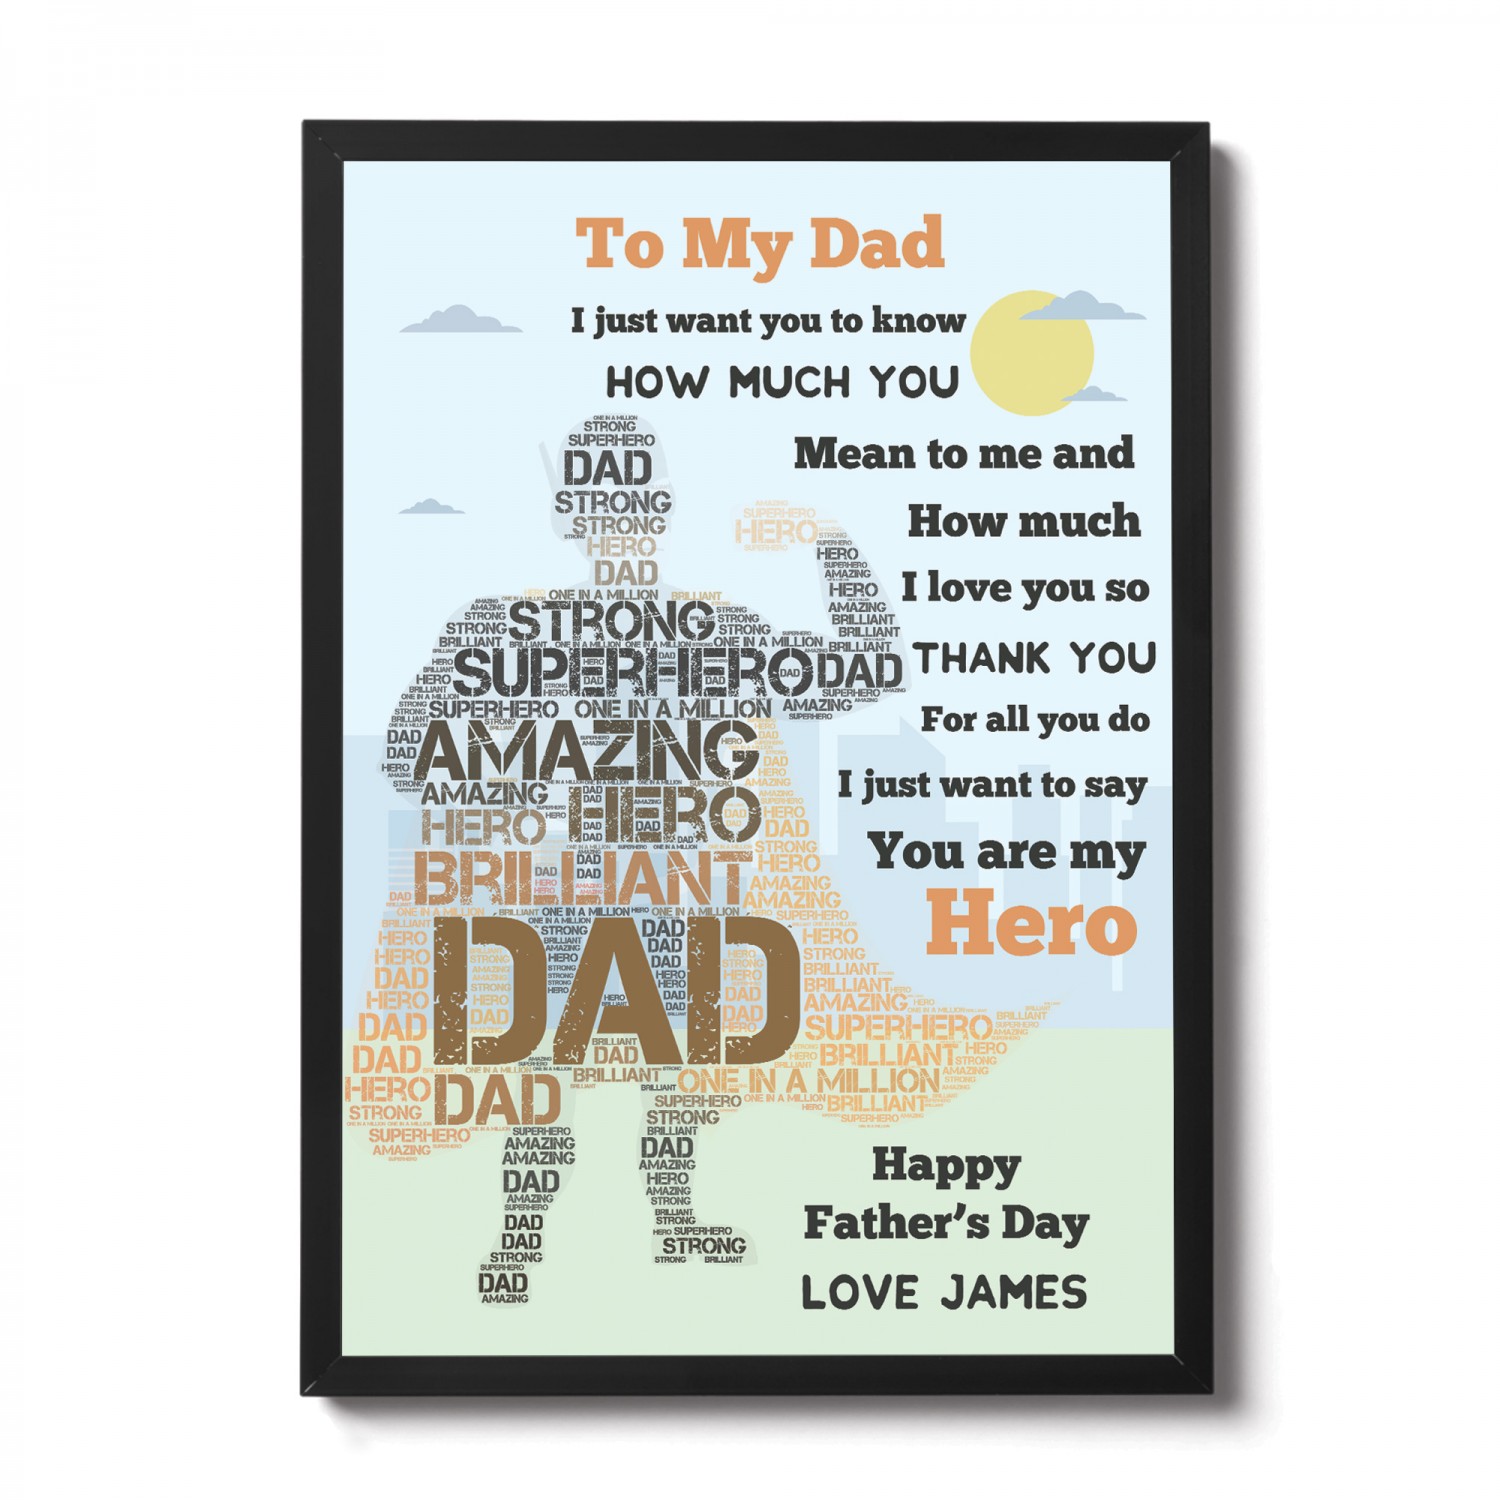 SUPER-DAD Father's Day BUNDLE Printable and Digital Gifts made by kids!